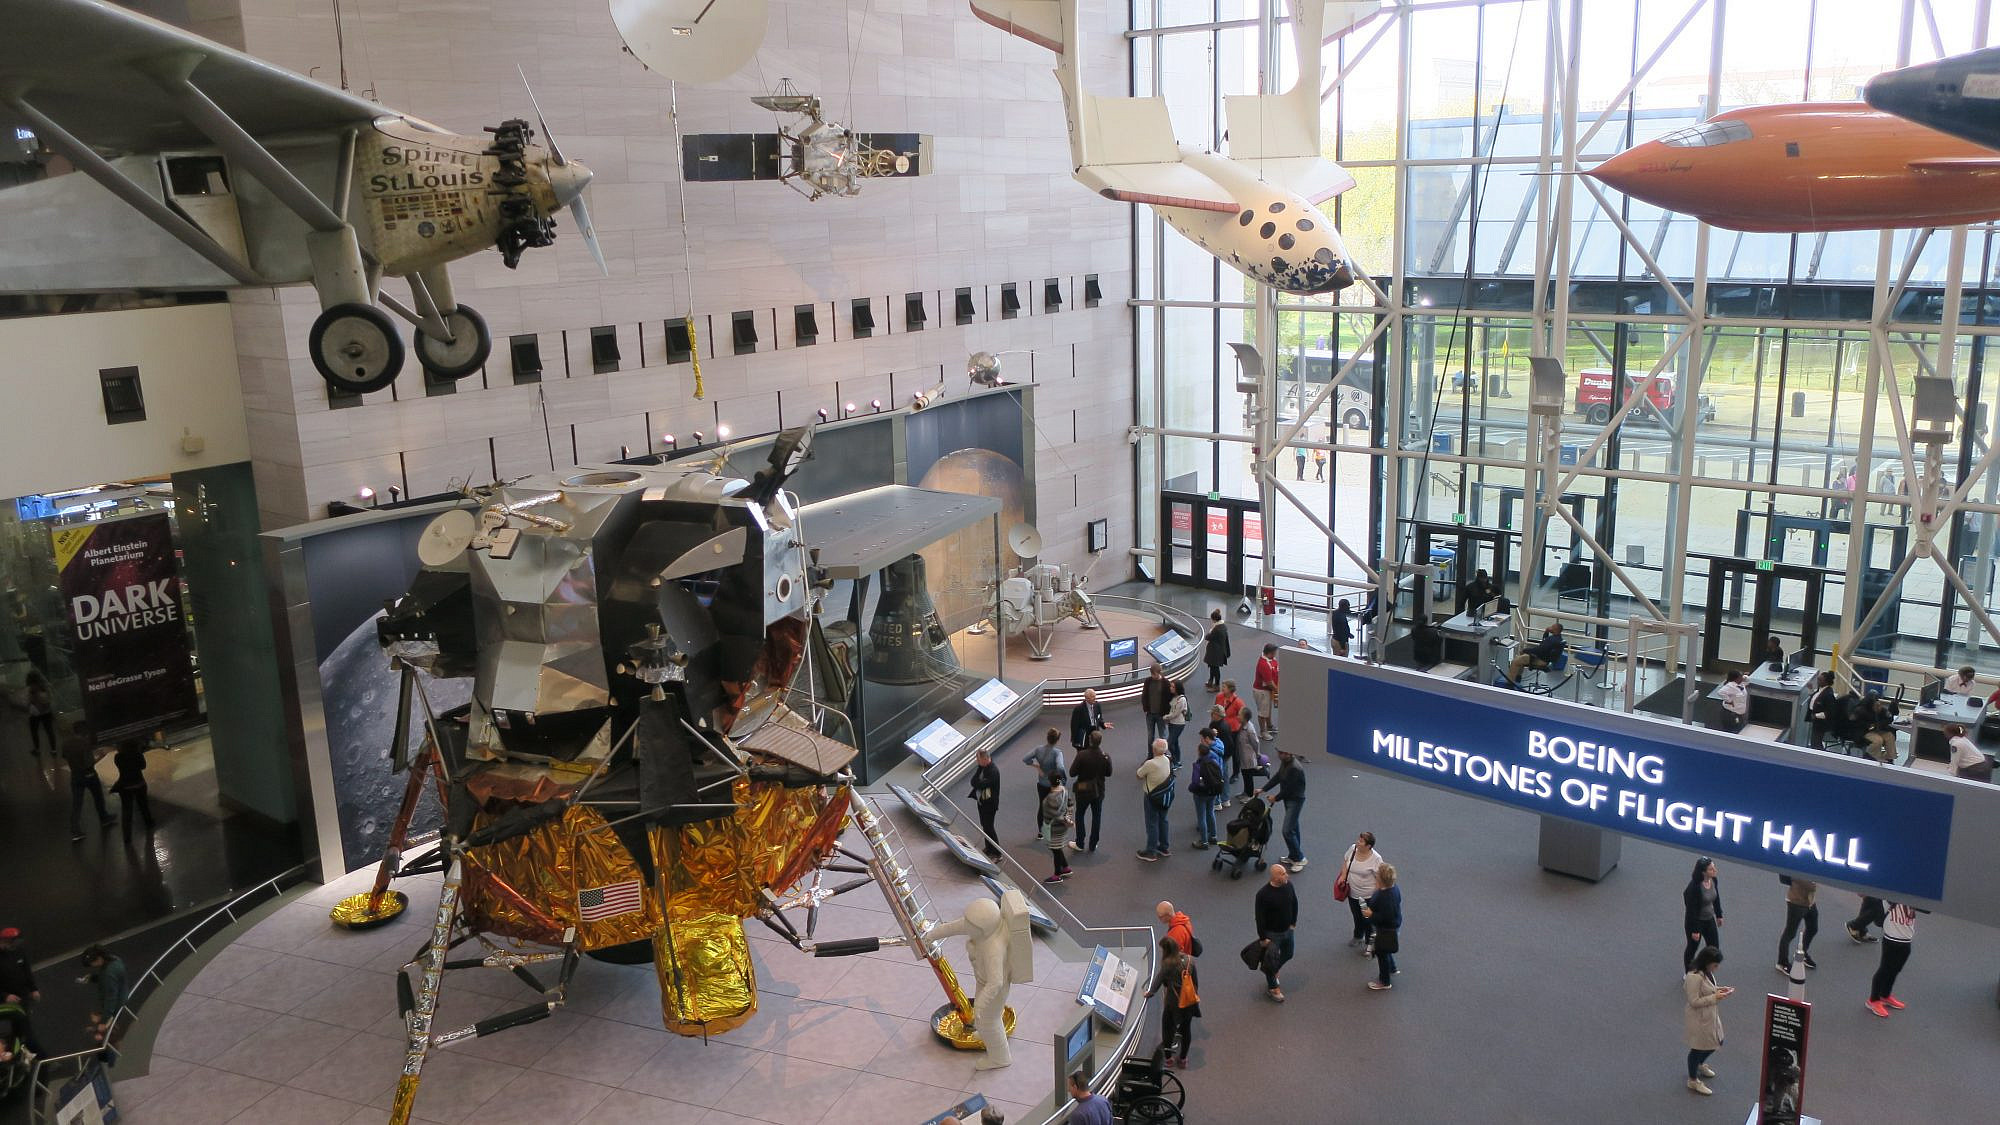 The Smithsonian National Air and Space Museum on the National Mall in Washington, D.C., with Charles Lindbergh's “Spirit of St. Louis” in the top left corner. Photo by Menachem Wecker.